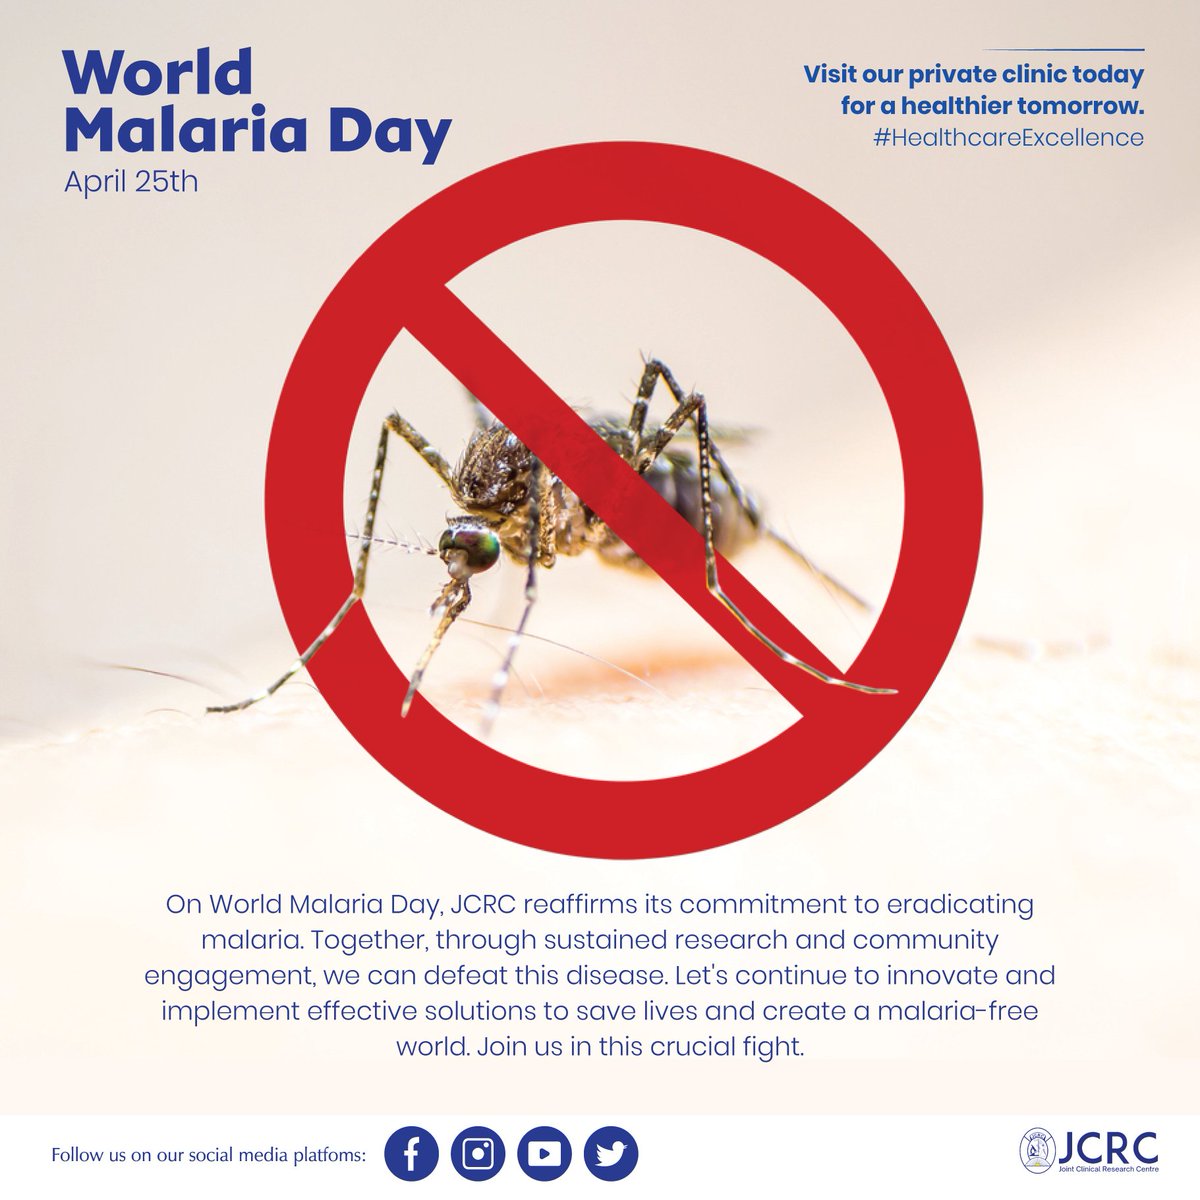 Today on World Malaria Day, we stand united in the fight against malaria. Through innovation and collaboration, we can defeat this preventable disease. Support global efforts and spread awareness. Let’s end malaria for good! #EndMalariaNow